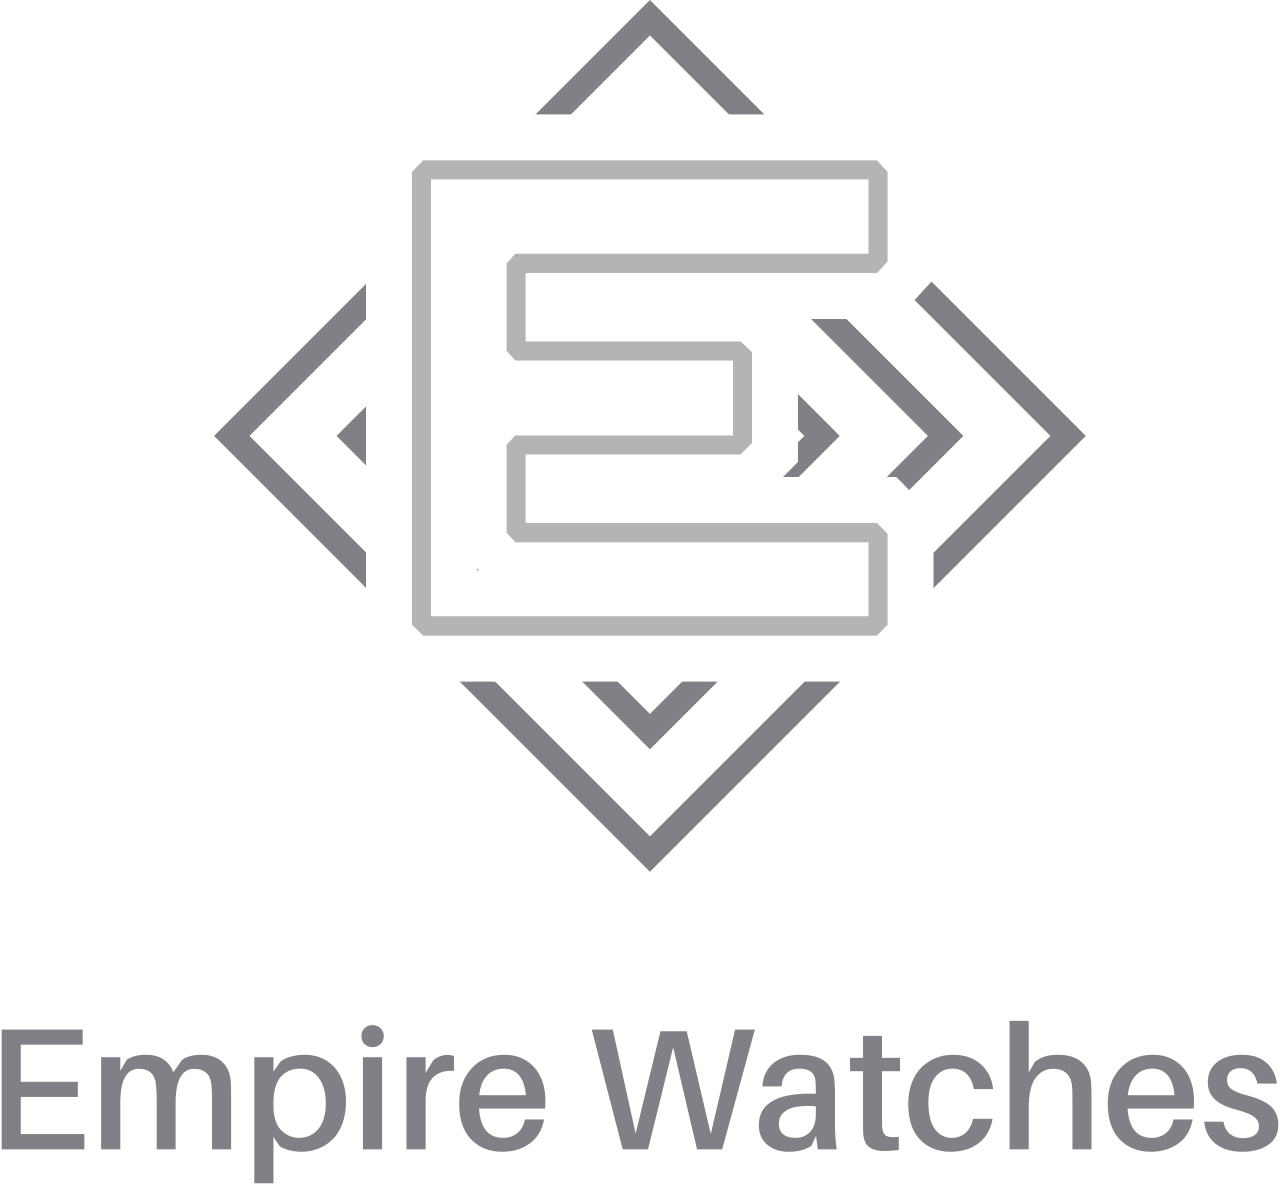 Empire Watches 's web page